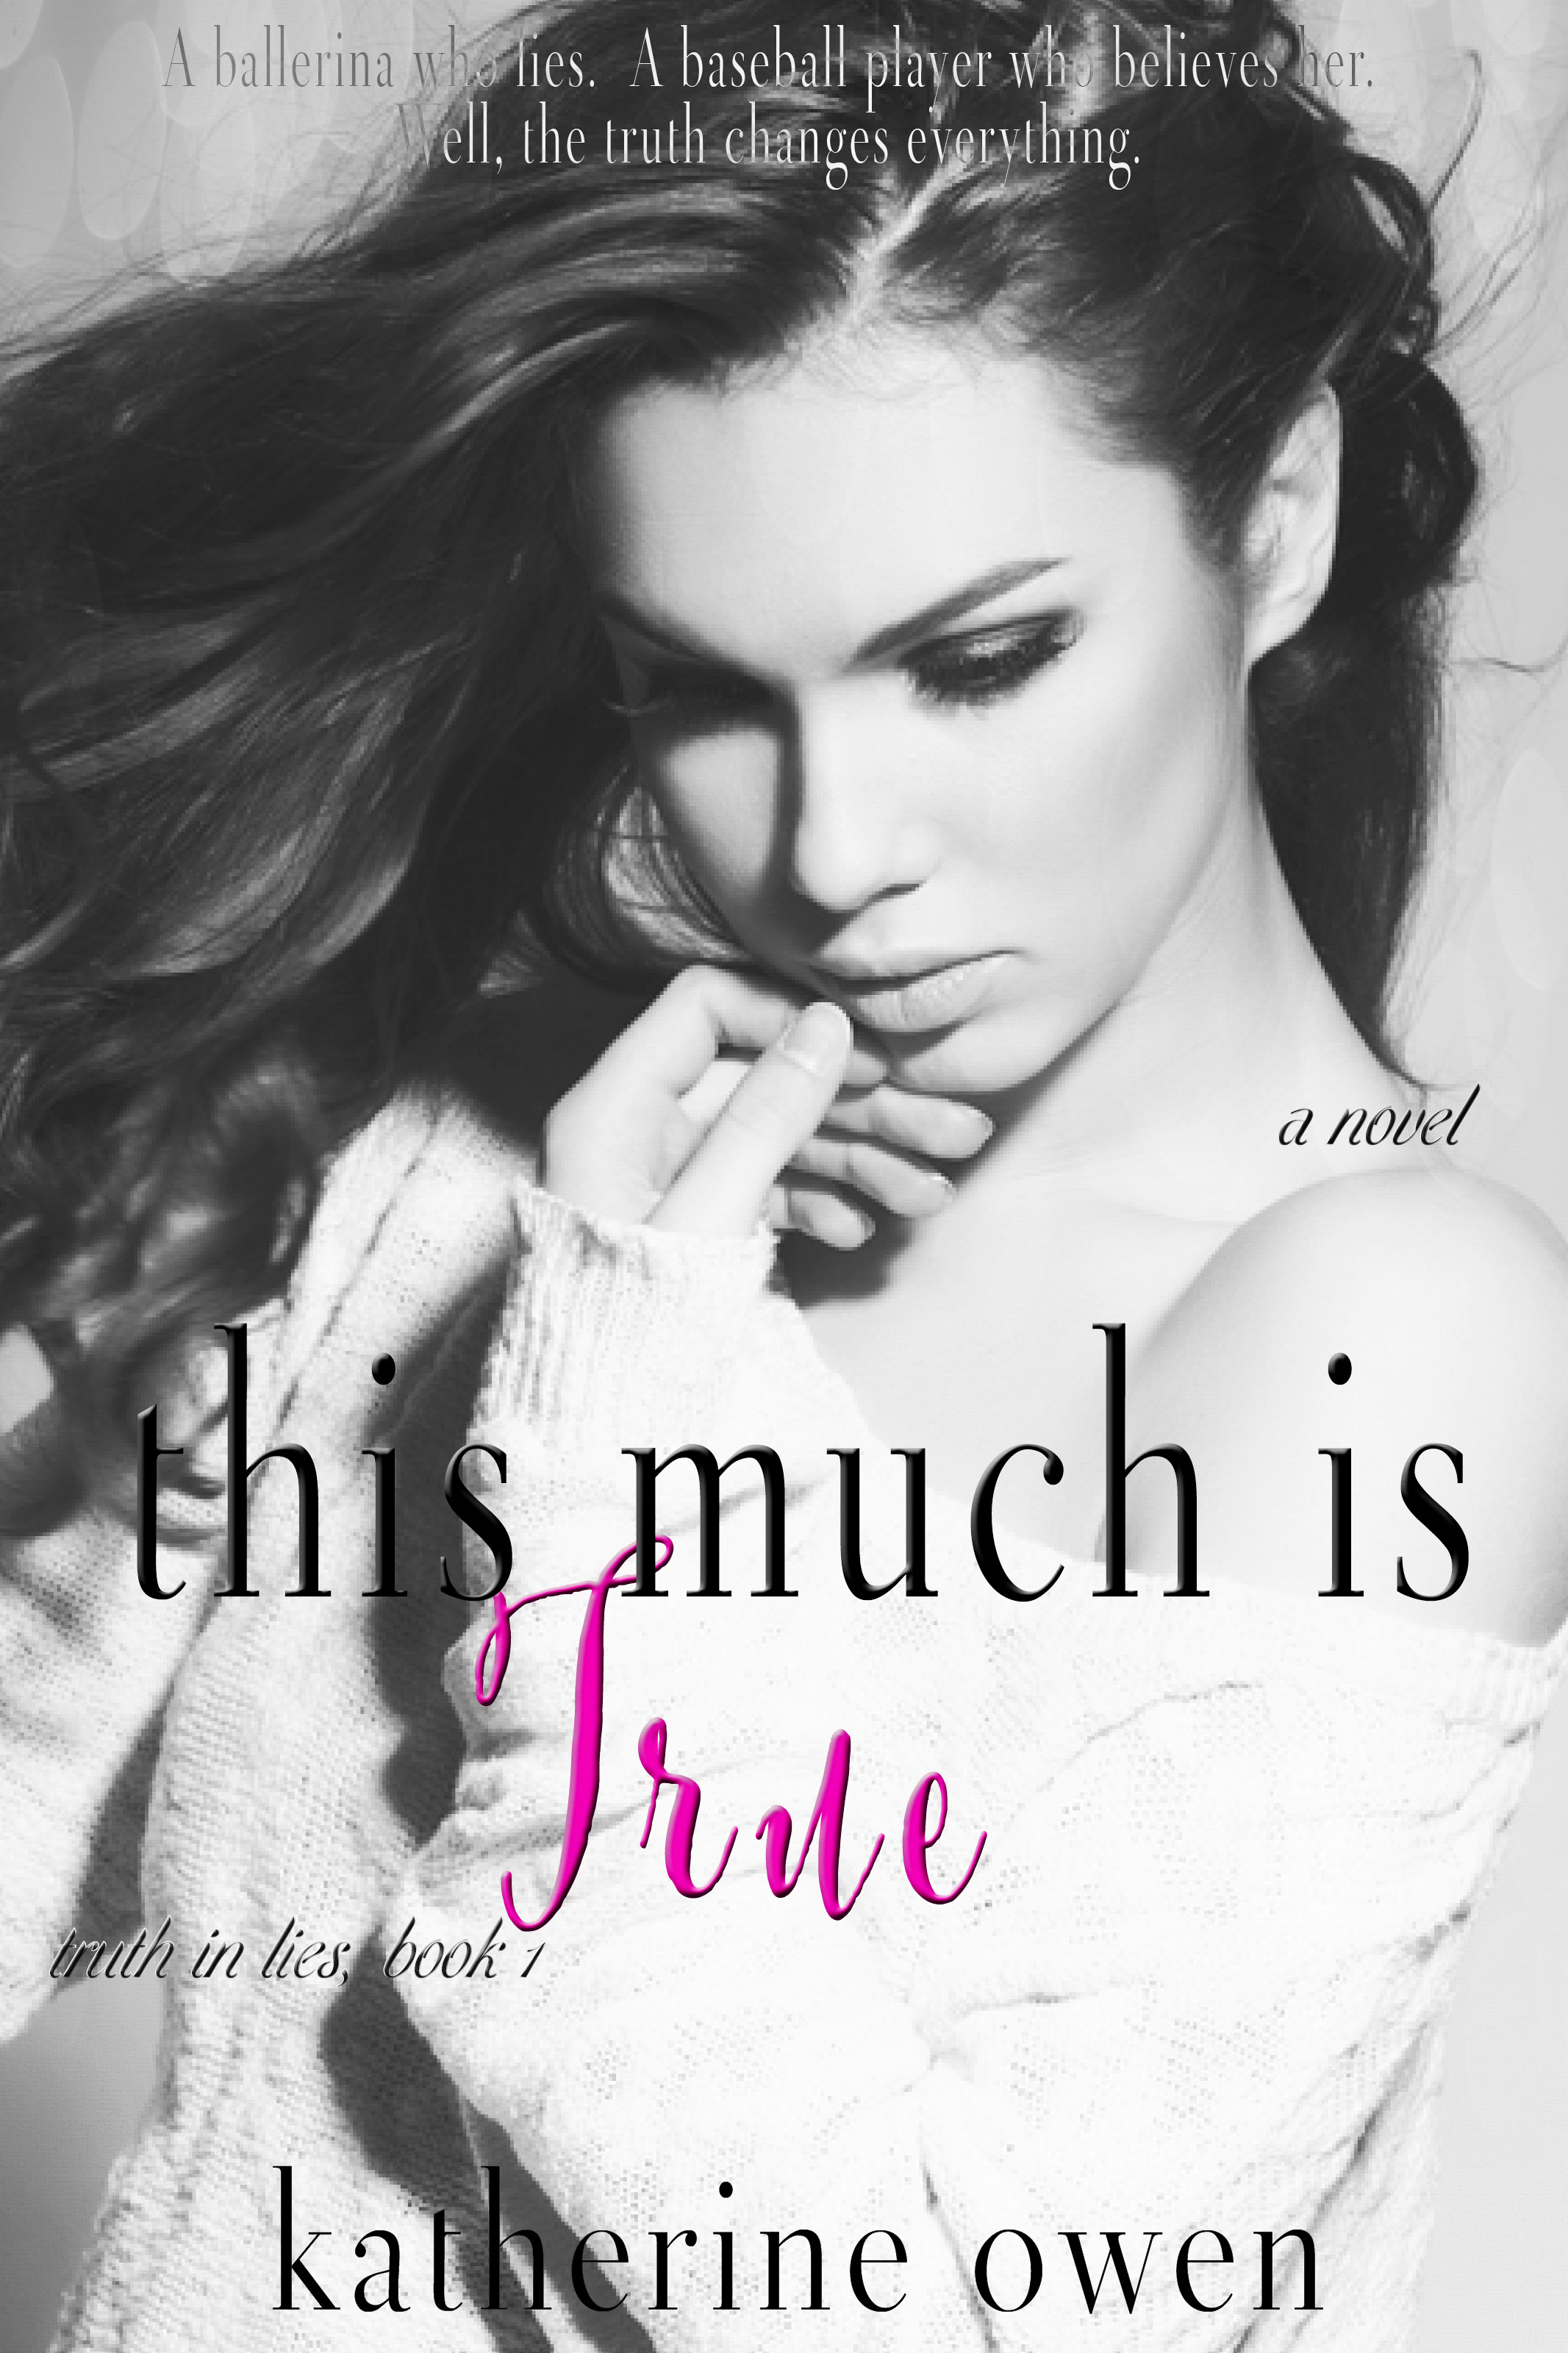 The best selling novel “This Much Is True” – milestone